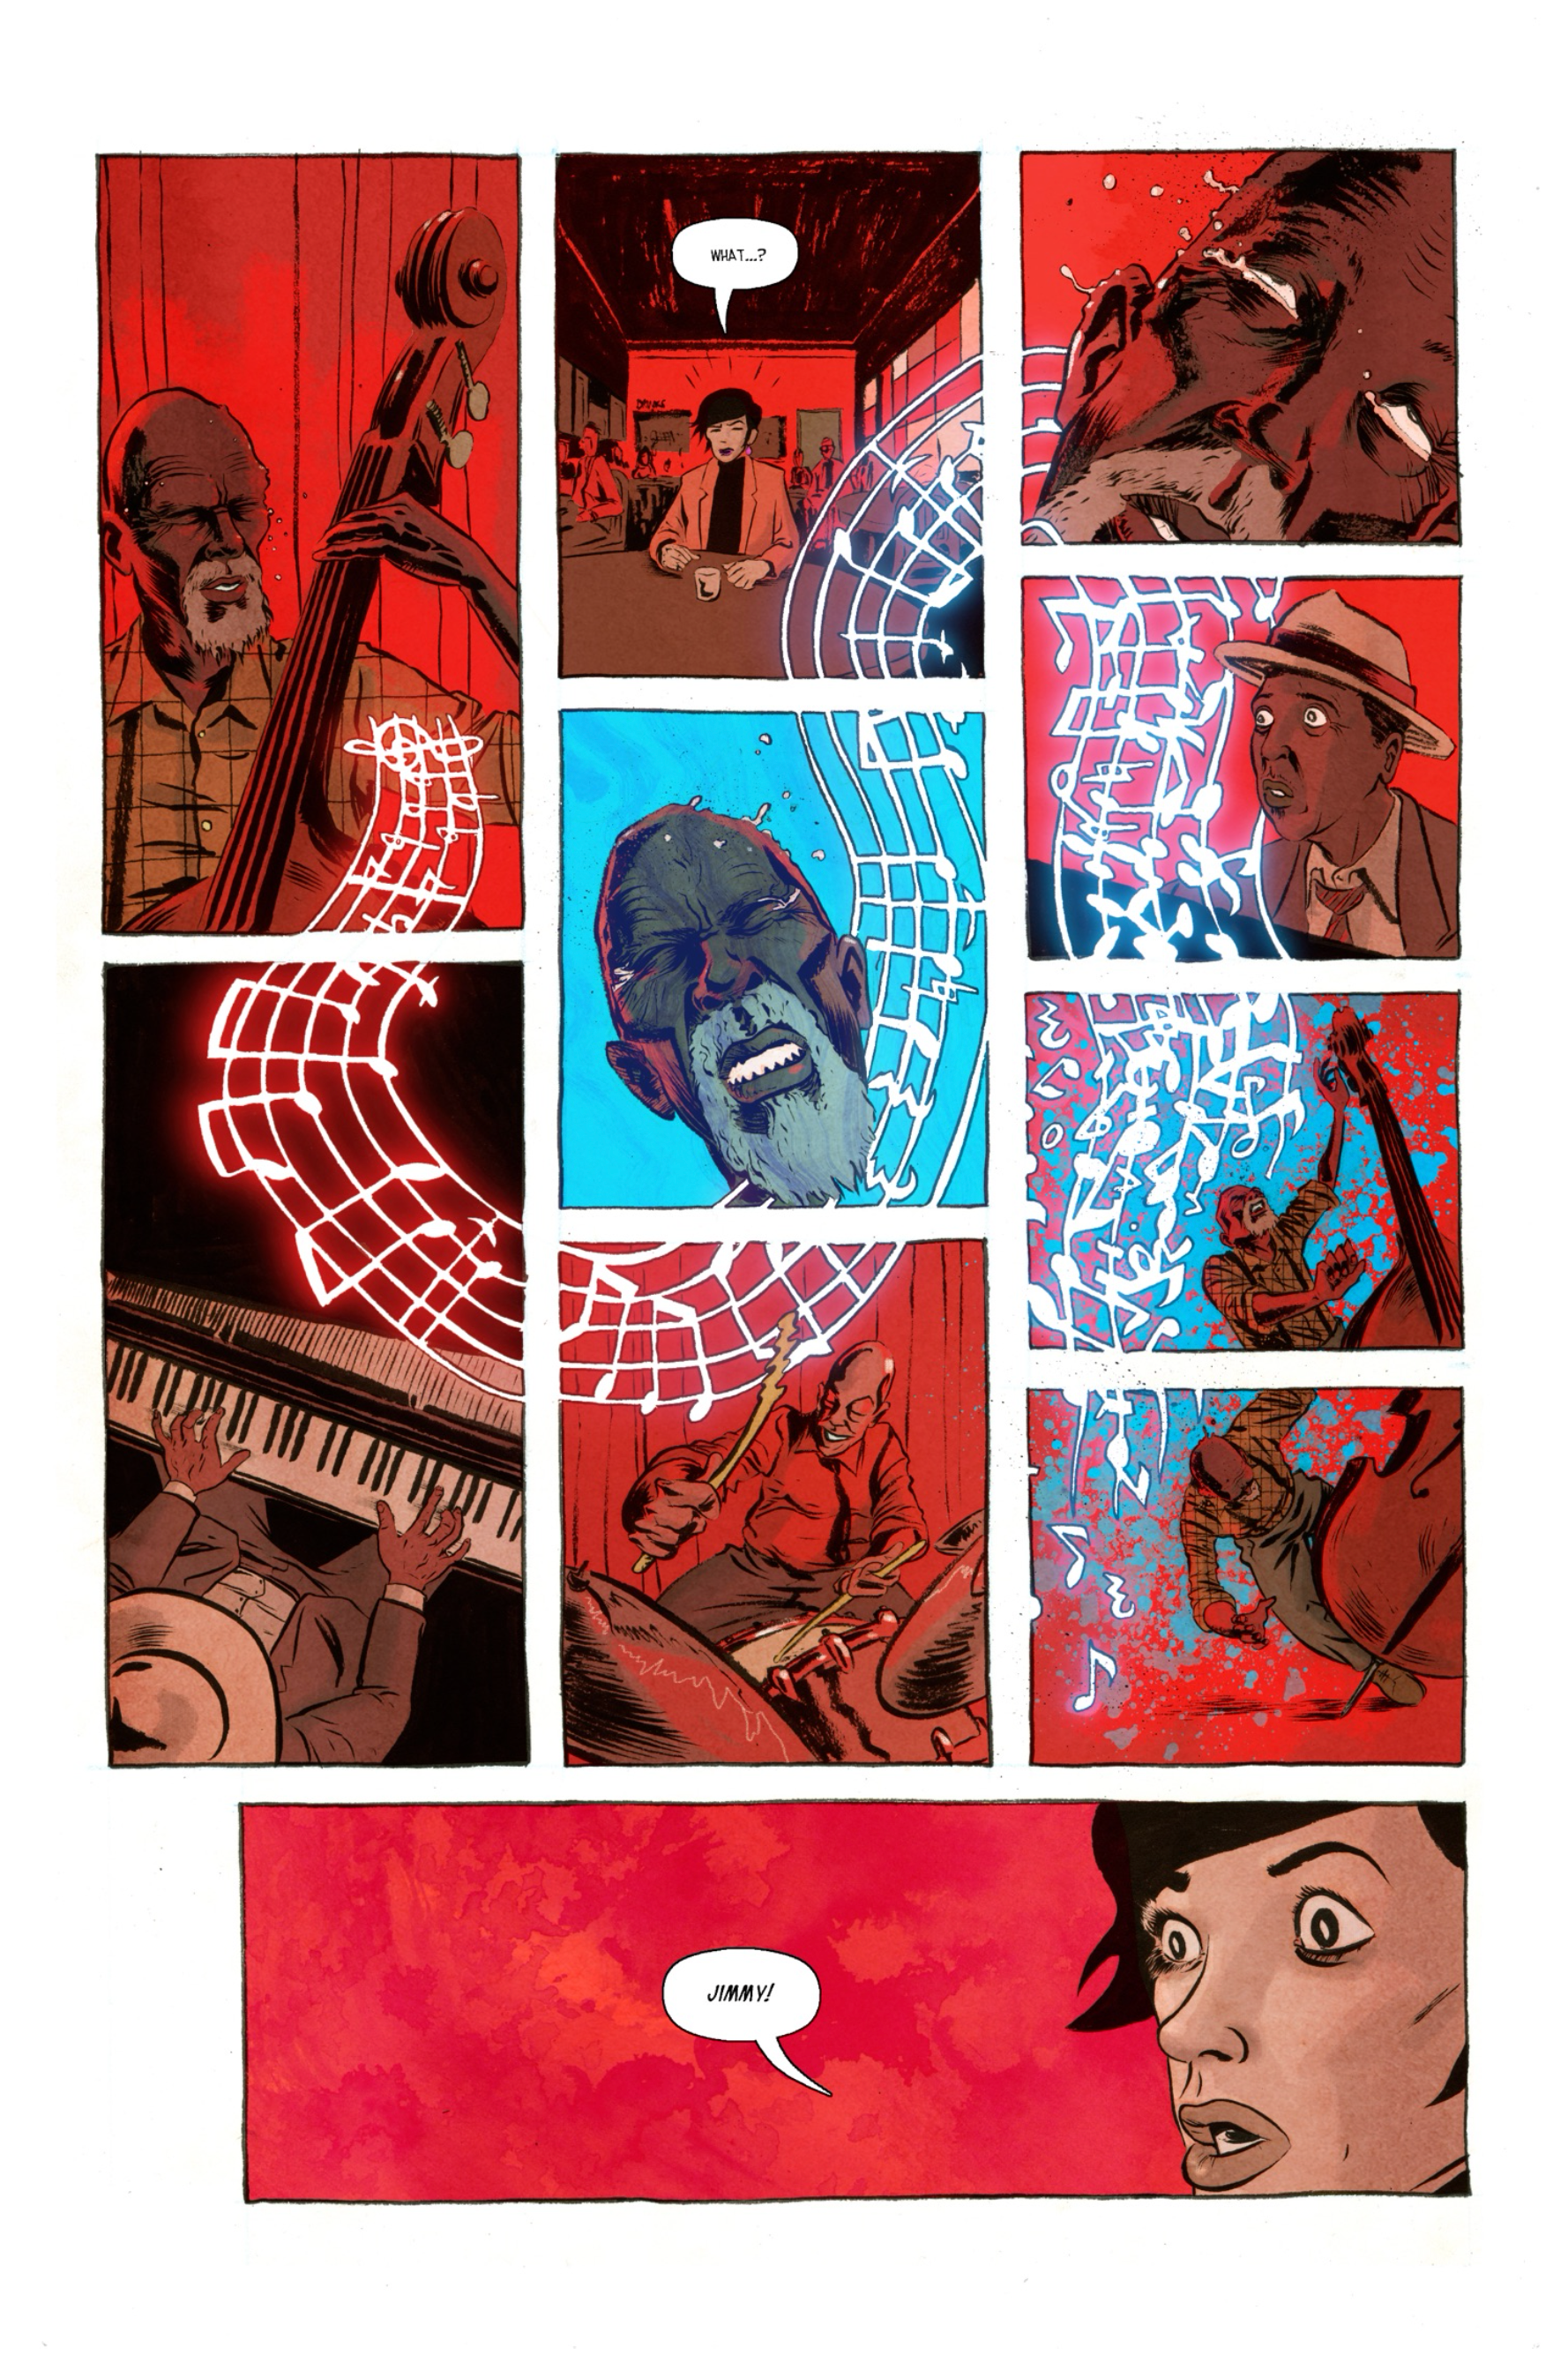 One page of panels, featuring Jimmy playing music and dropping his cello